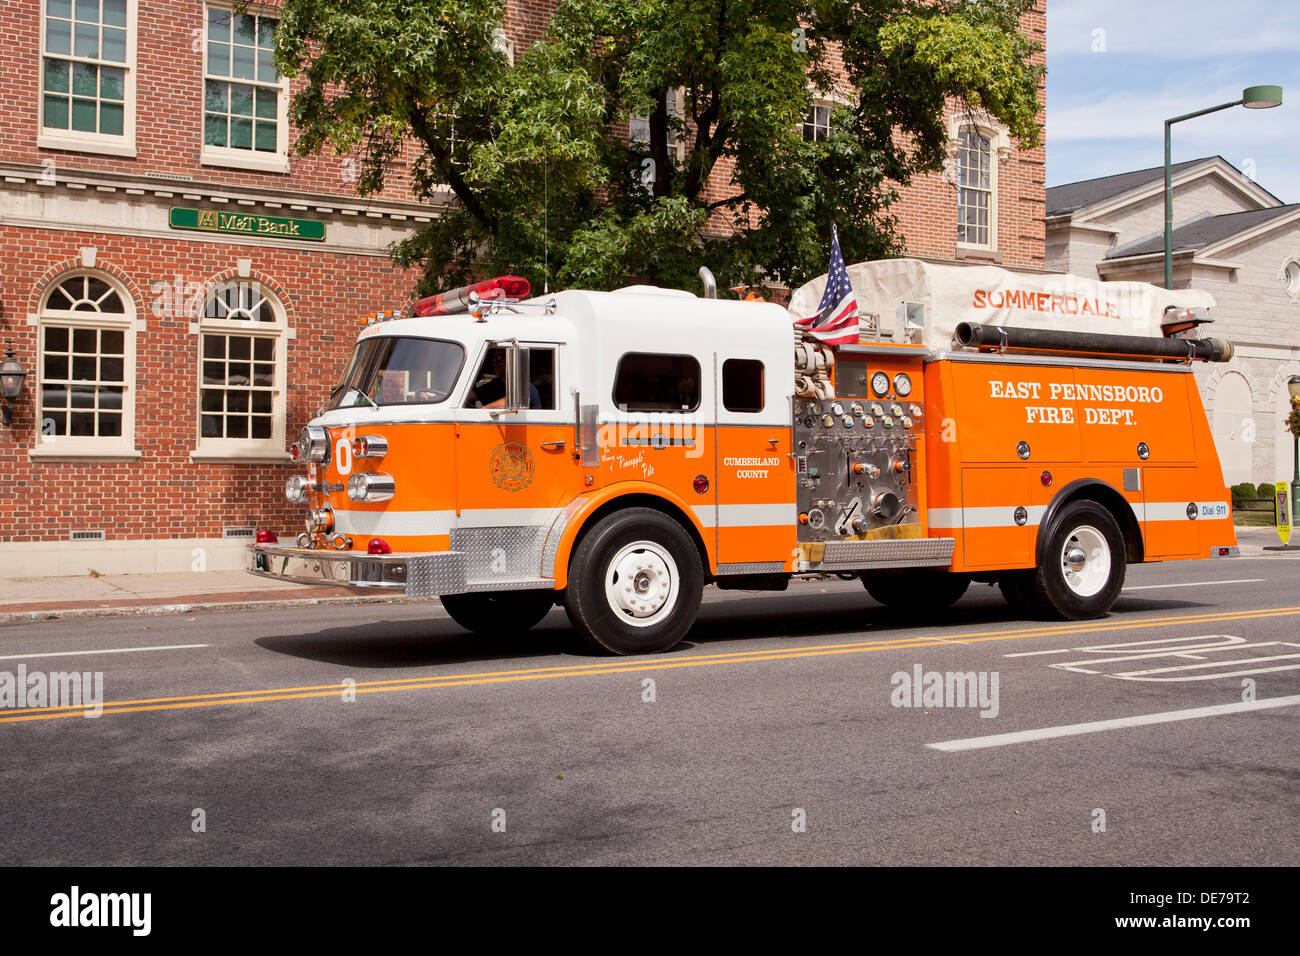 1969 American LaFrance vintage fire truck - New York, USA Banque D'Images